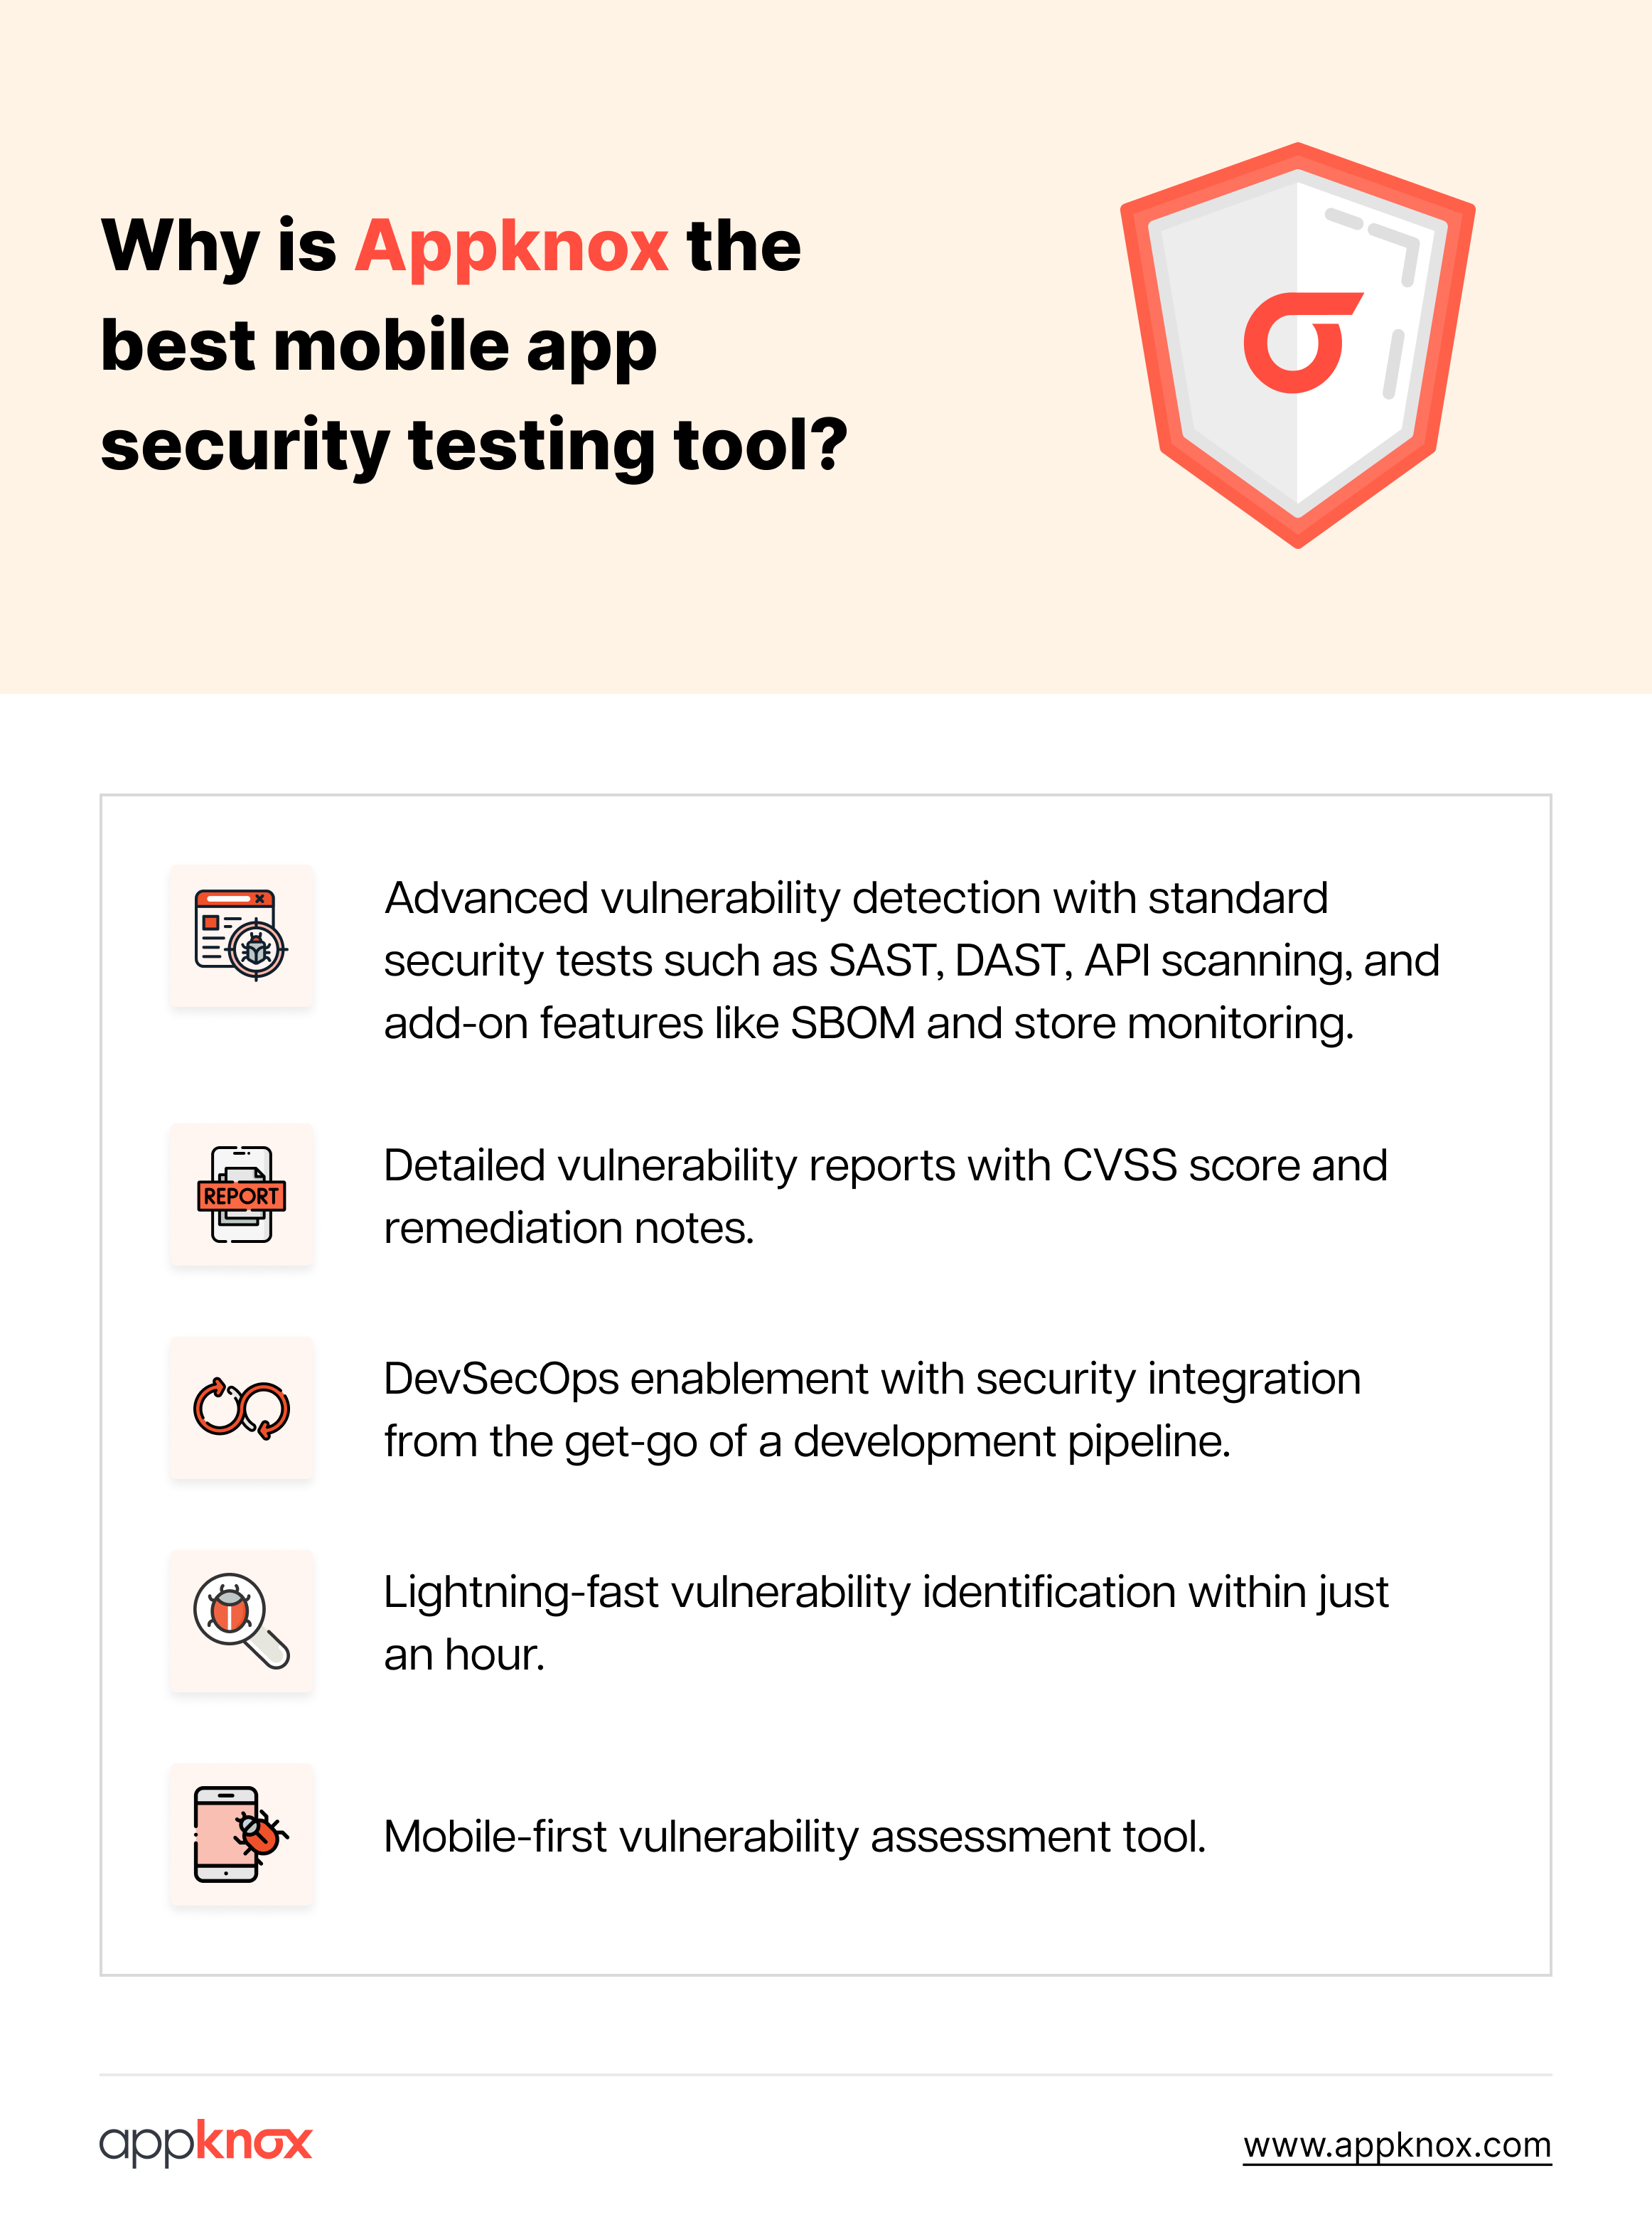 Why is Appknox the best mobile app security testing tool? - Mobile application vulnerability assessment